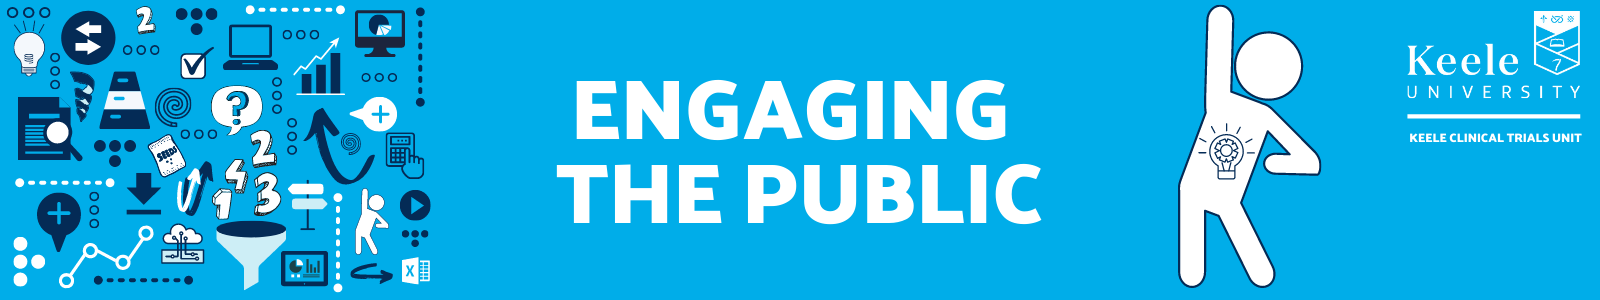 Engaging the public